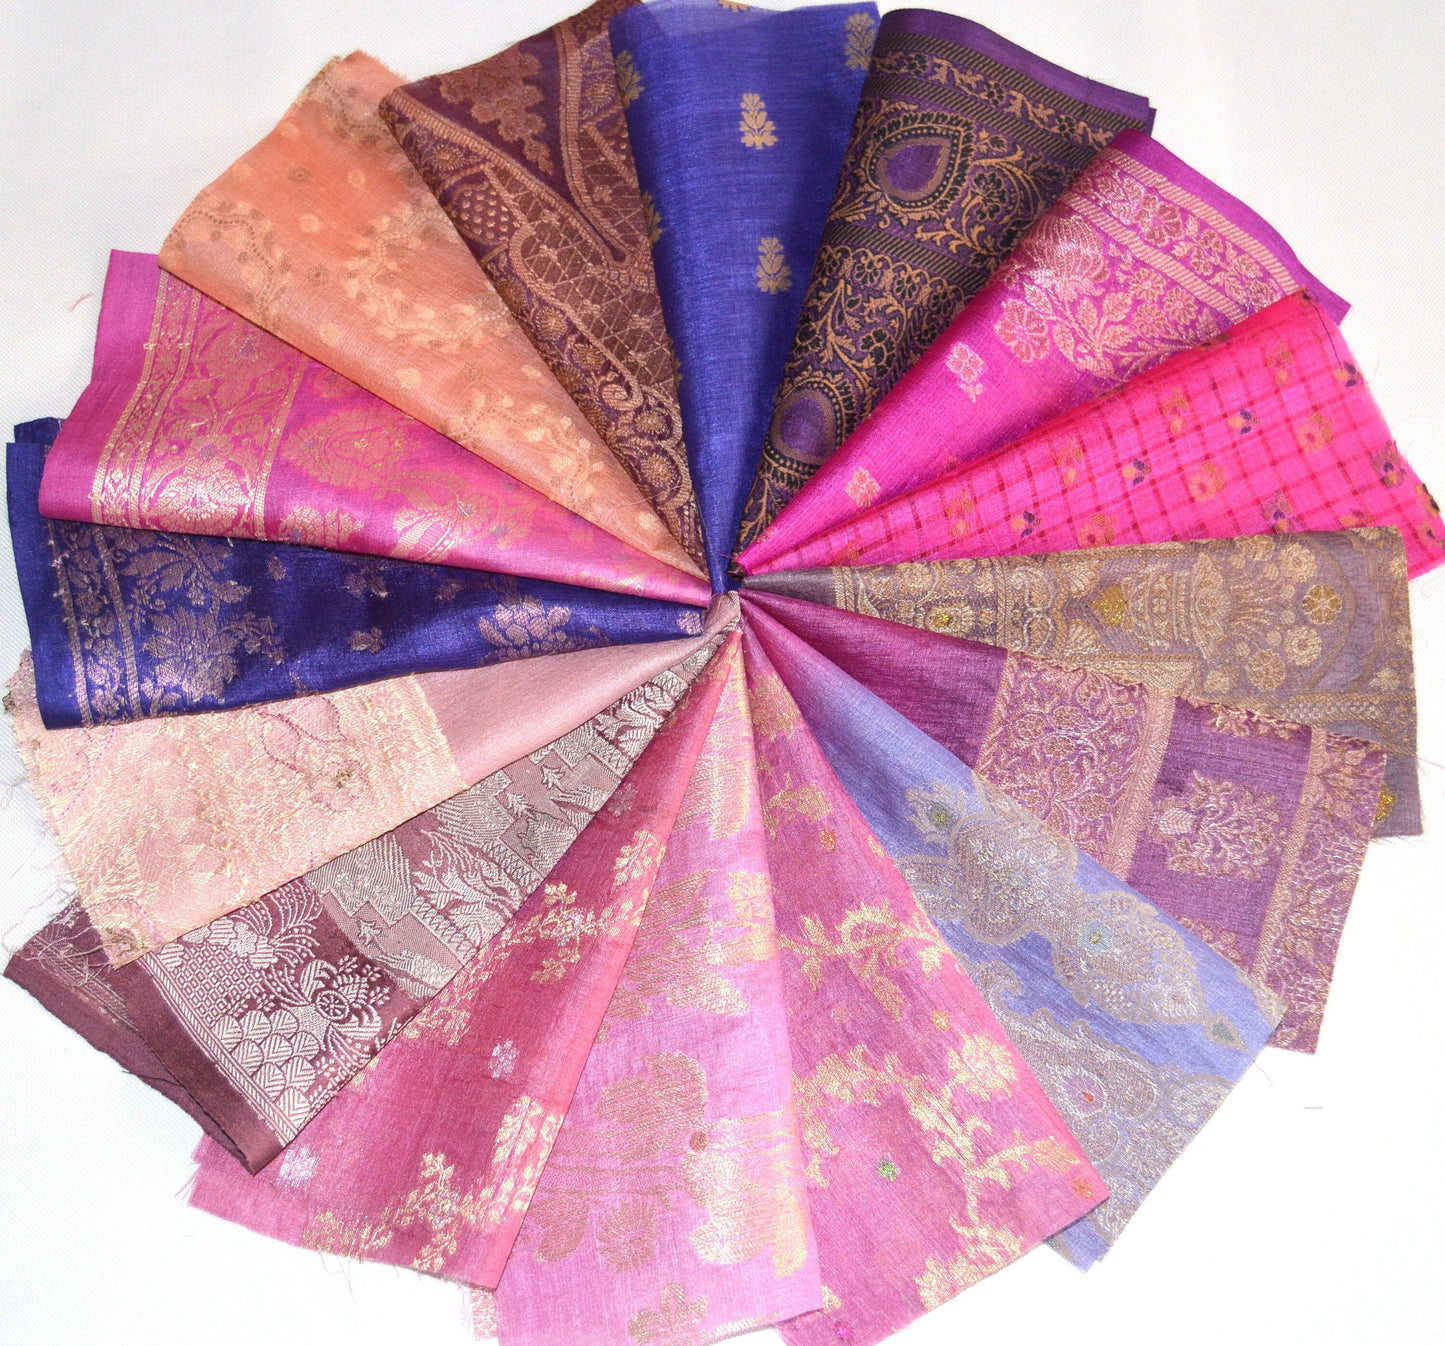 5 Inch x 16 Pieces Pink Purple Recycled Vintage Sari Scraps Craft Fabric Card Making Collage Mixed Media Textile Art Junk Journals